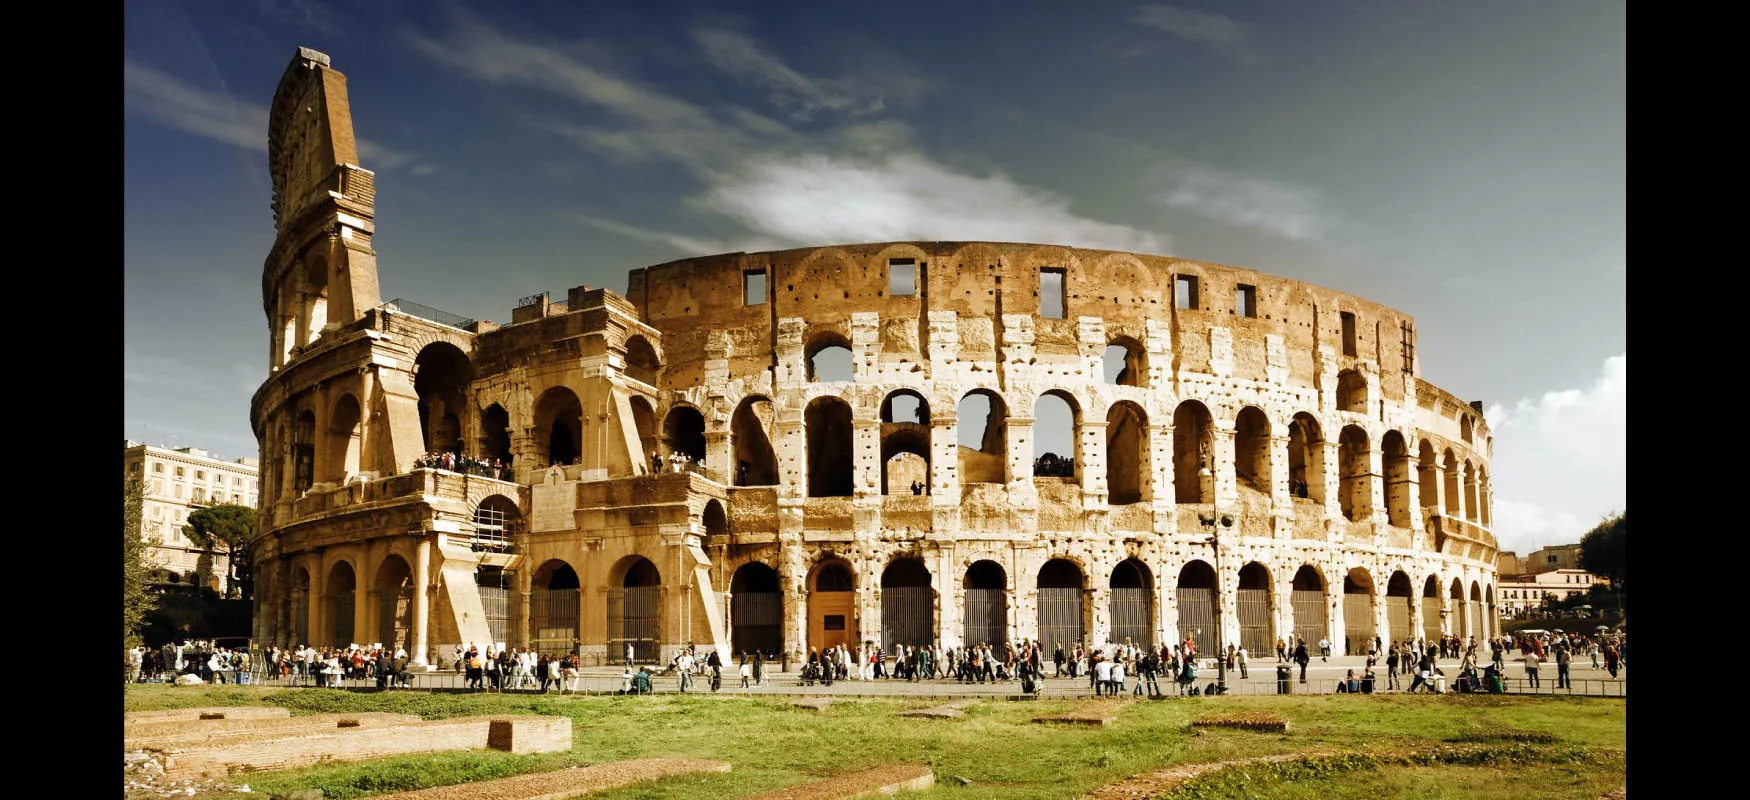 A photograph of the Roman Colosseum with tourists surrounding it.